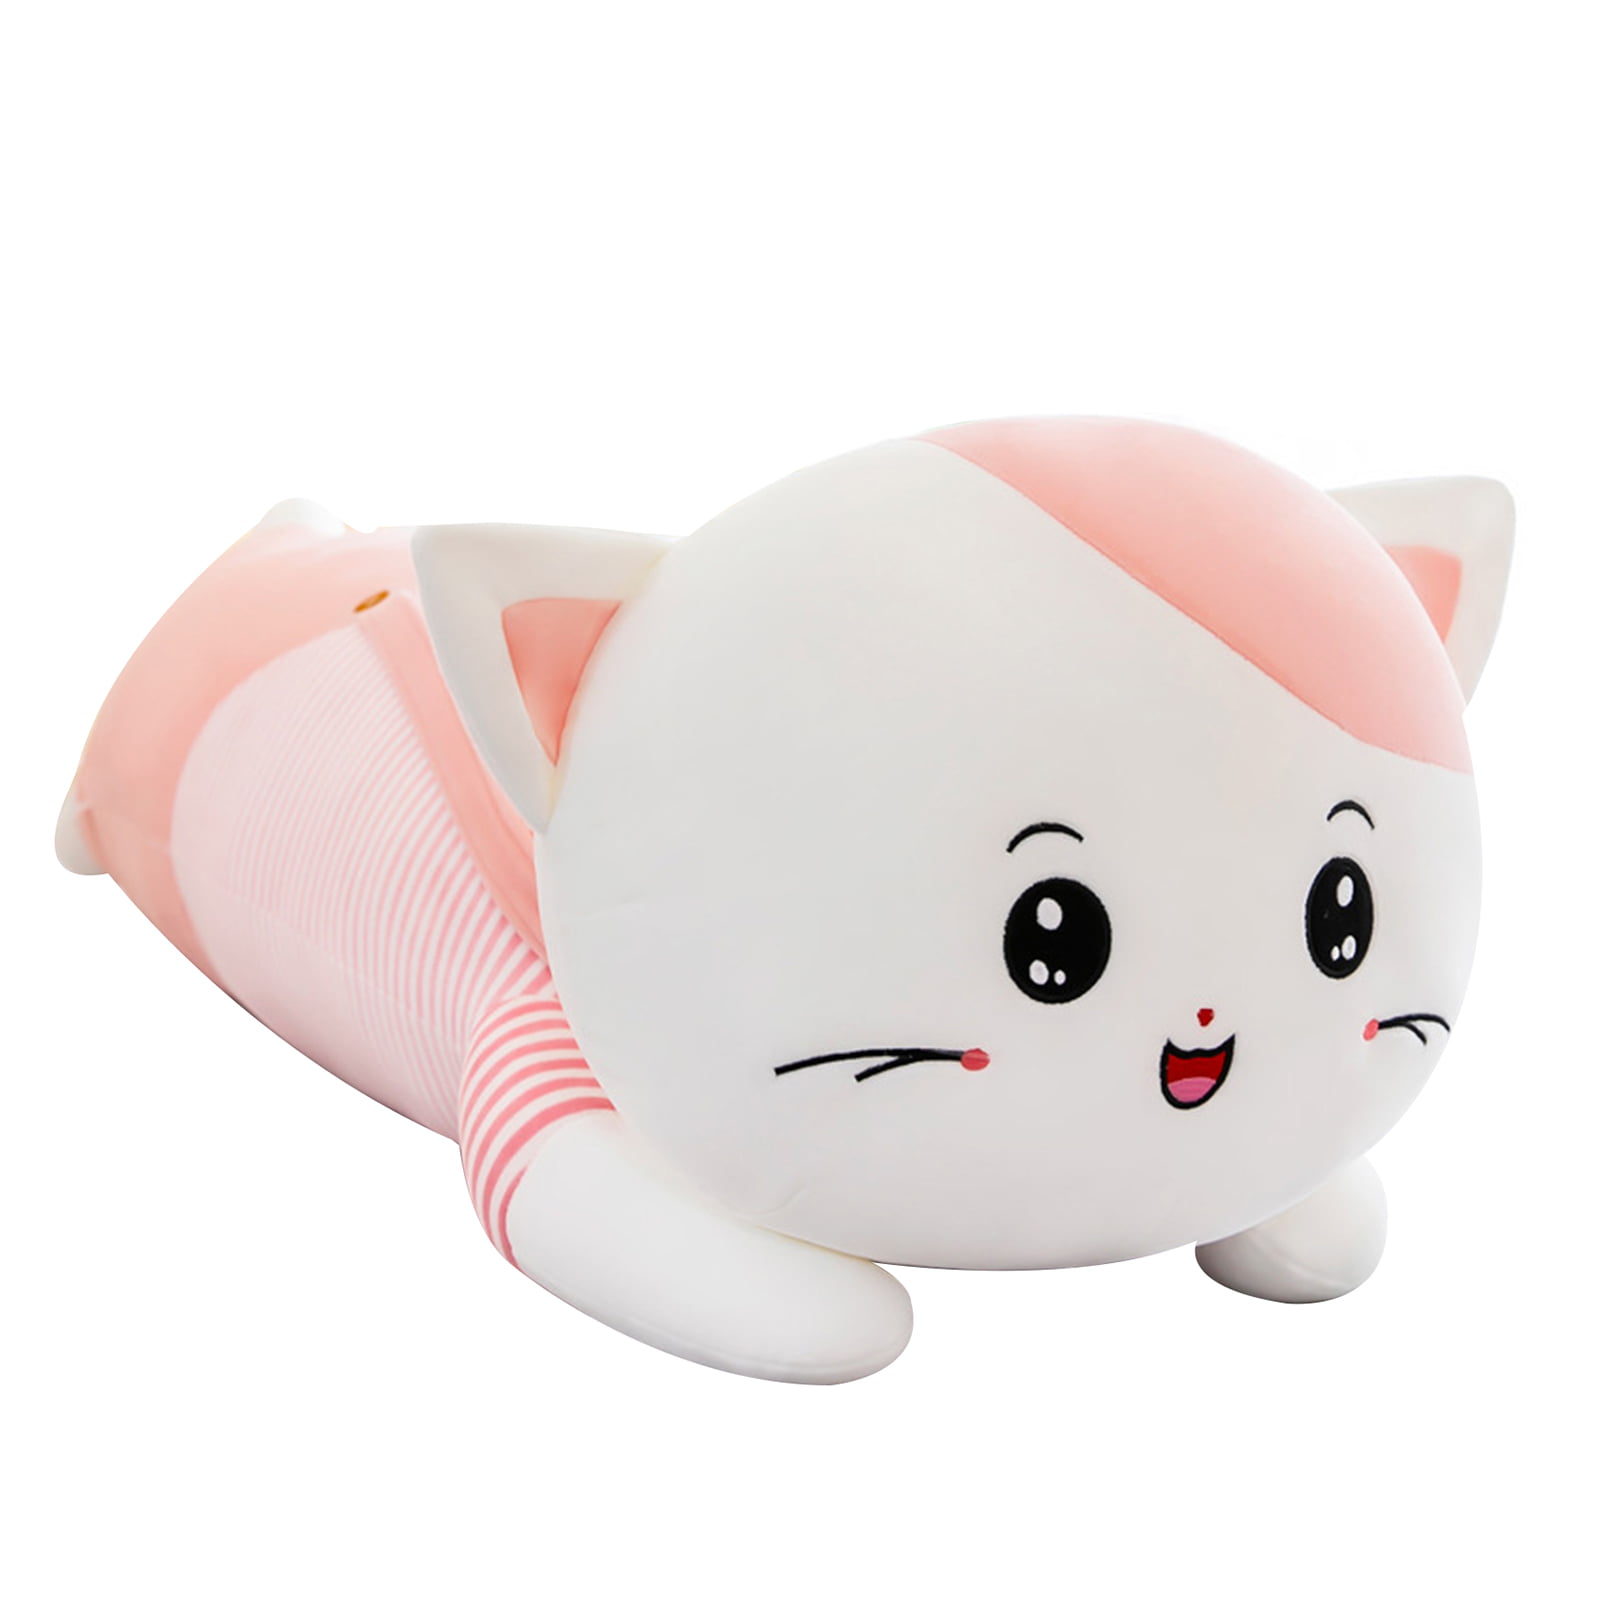 Stay Cuddly with Out Jumbo Cat Plush